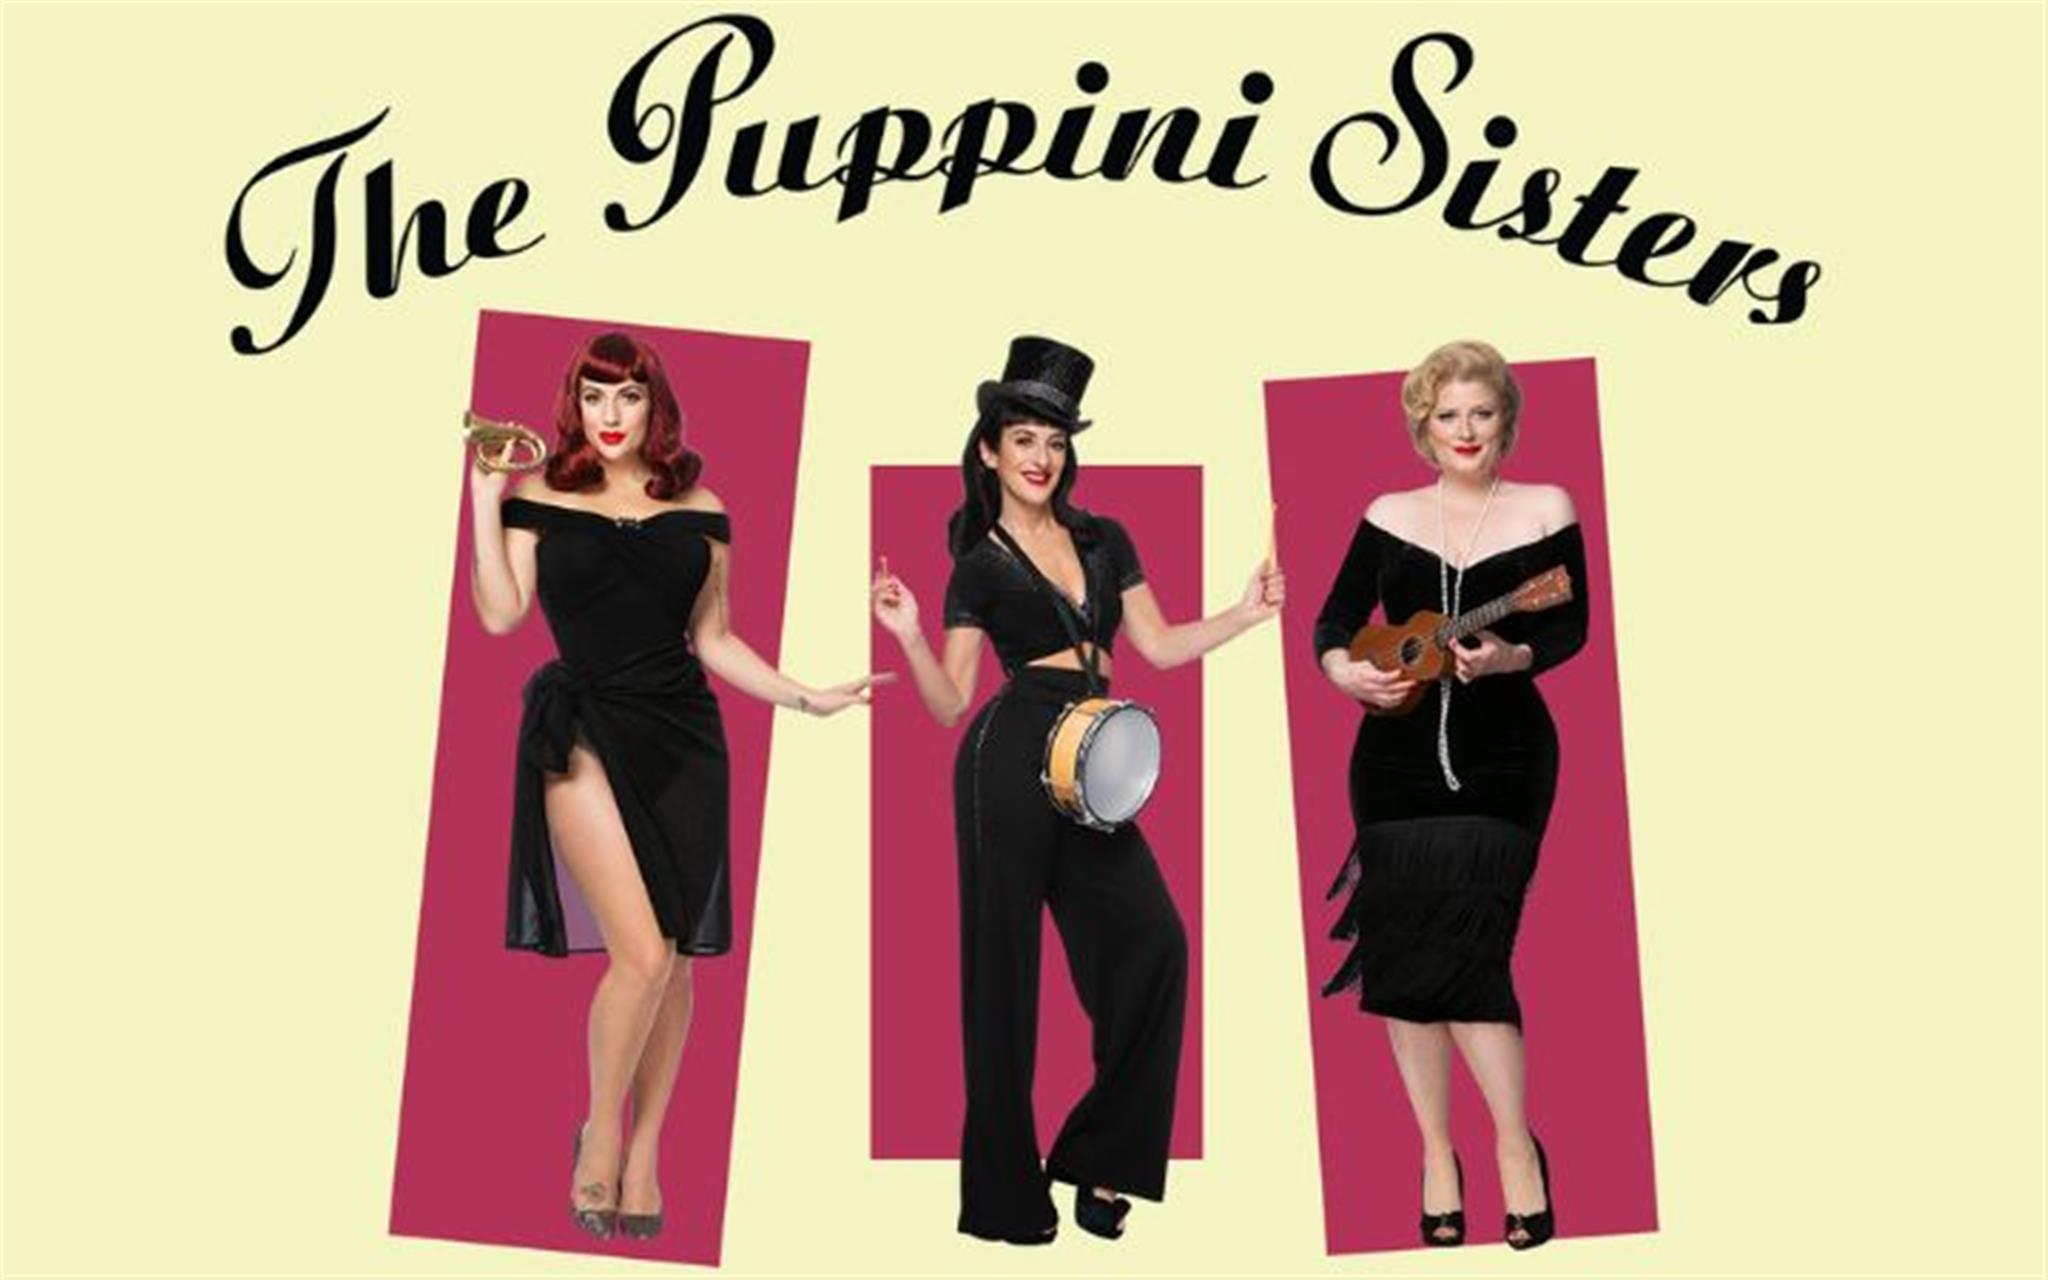 The Puppini Sisters image